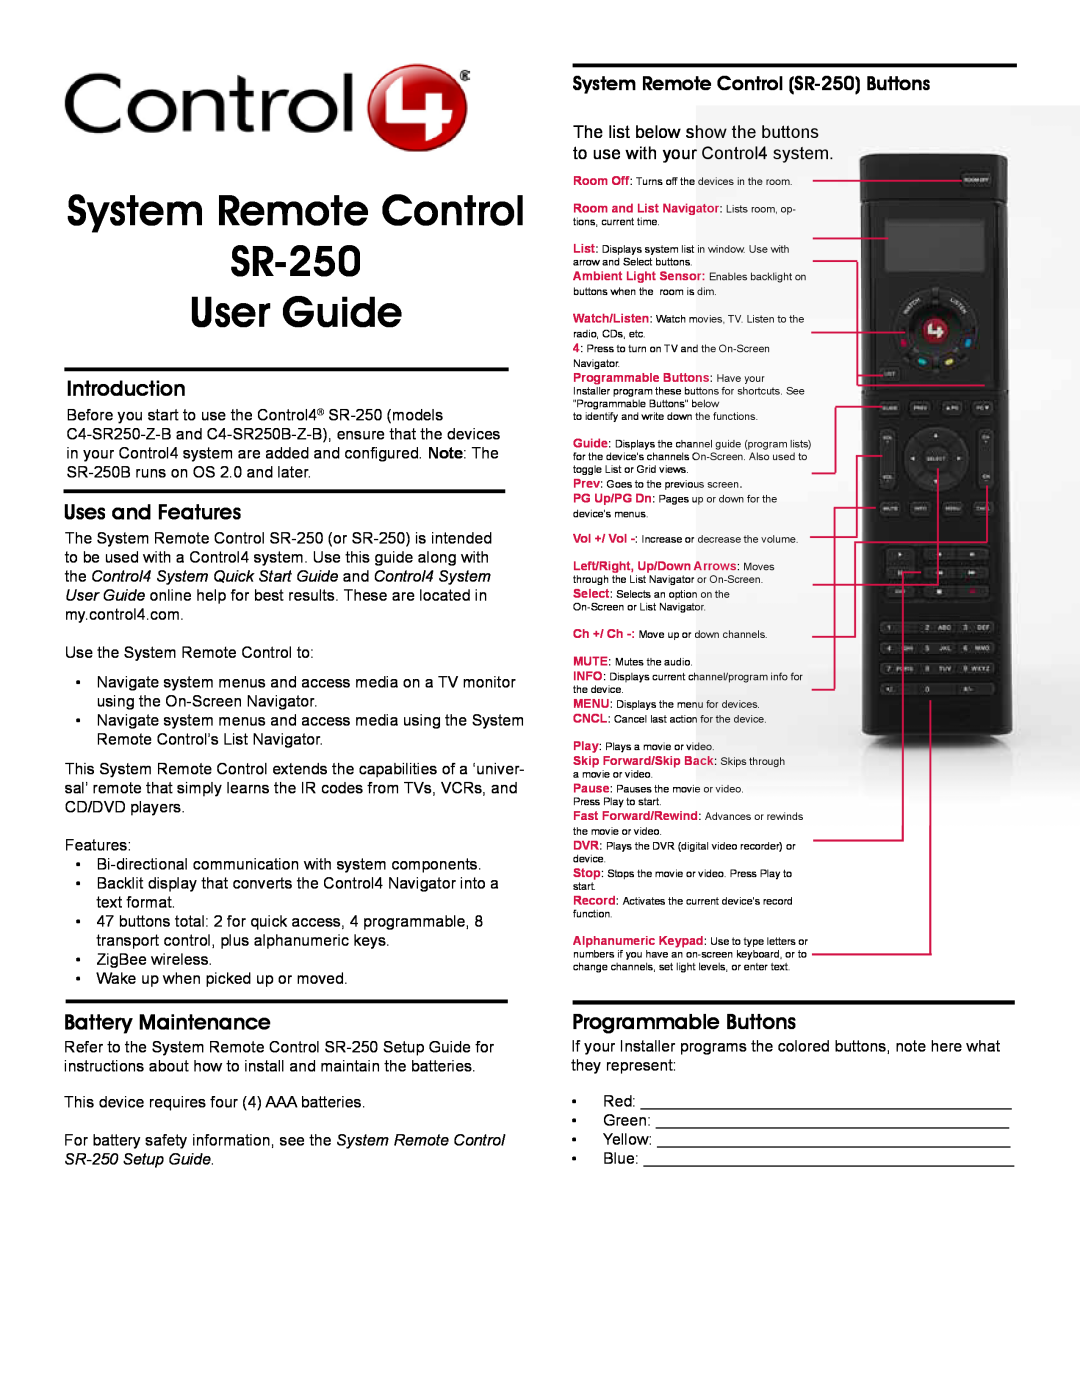 Control4 C4-SR250B-Z-B quick start Introduction, Uses and Features, Battery Maintenance, Programmable Buttons 